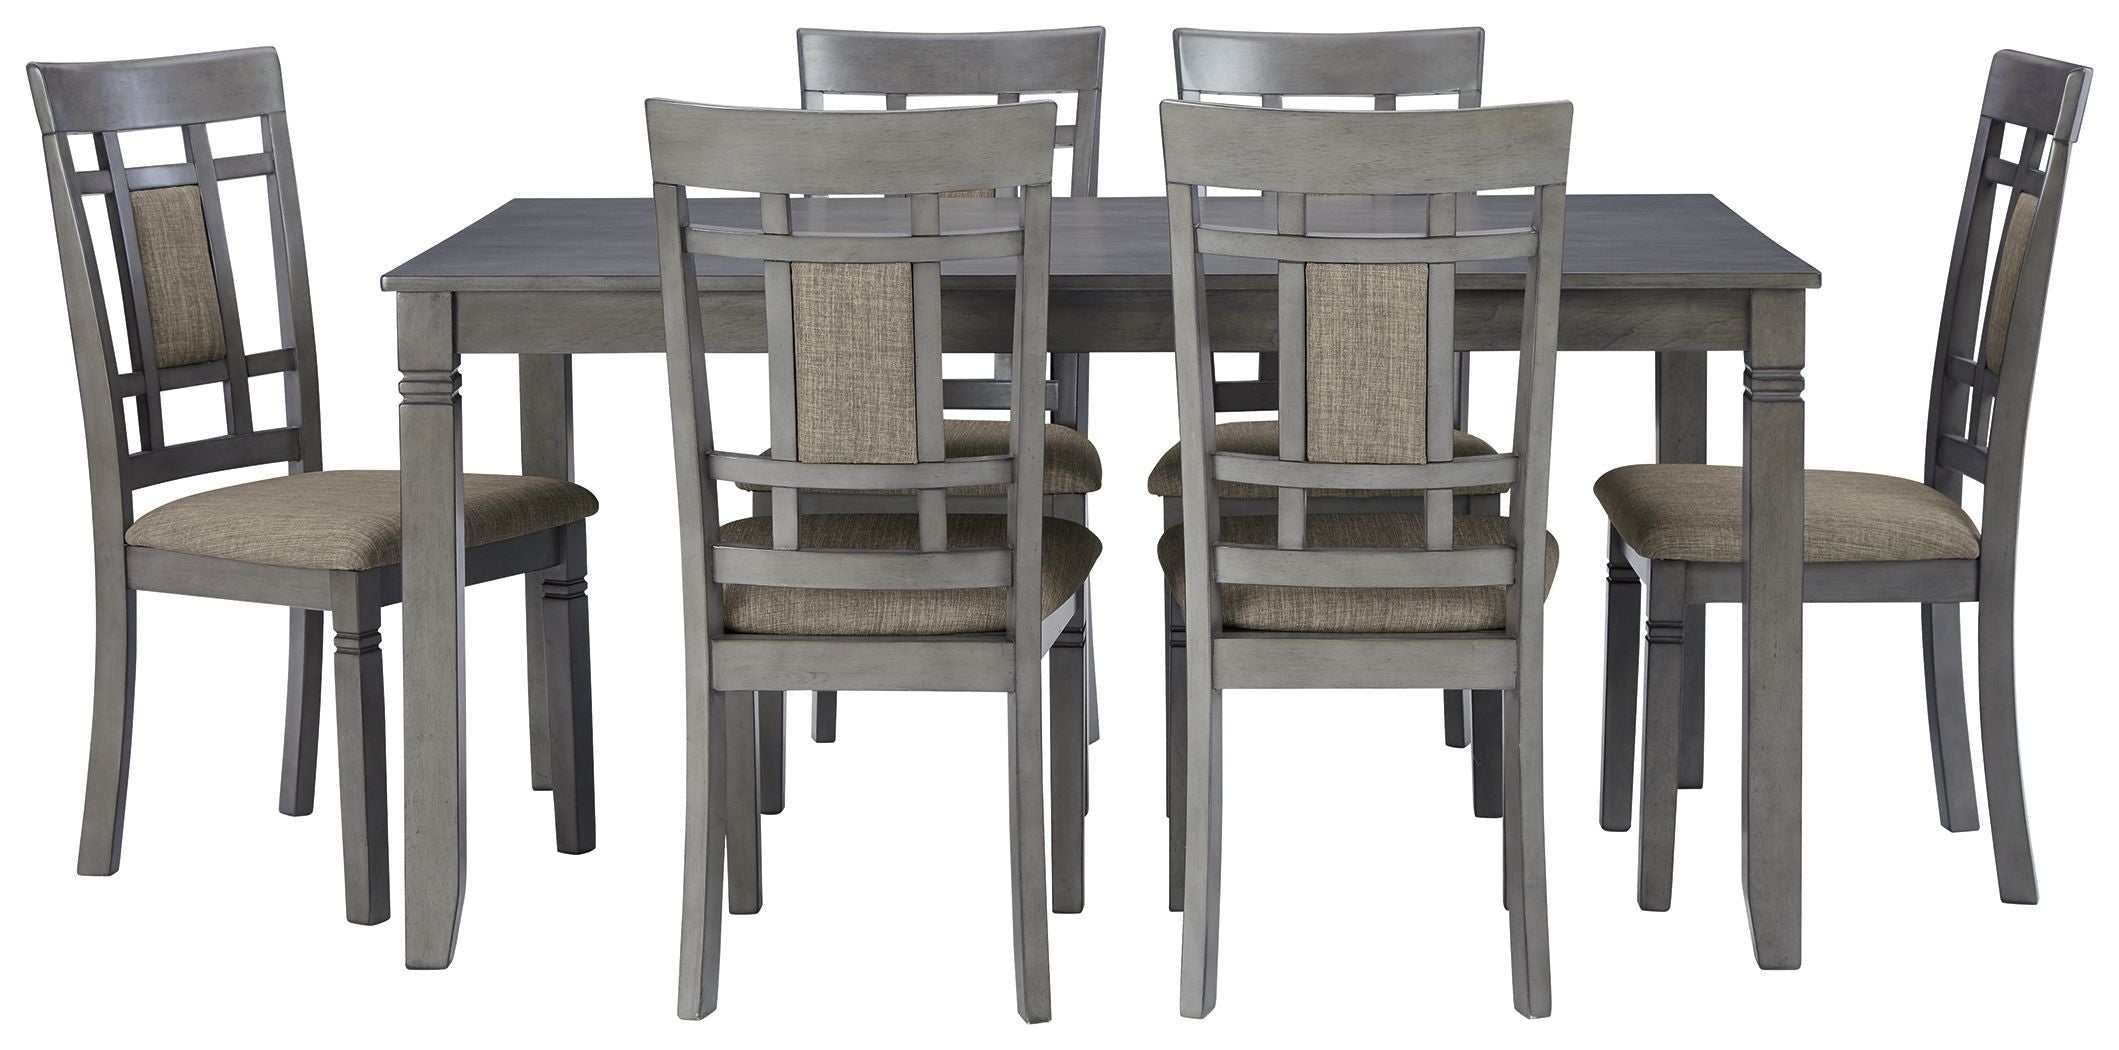 Jayemyer - Charcoal Gray - Rect Drm Table Set (Set of 7)